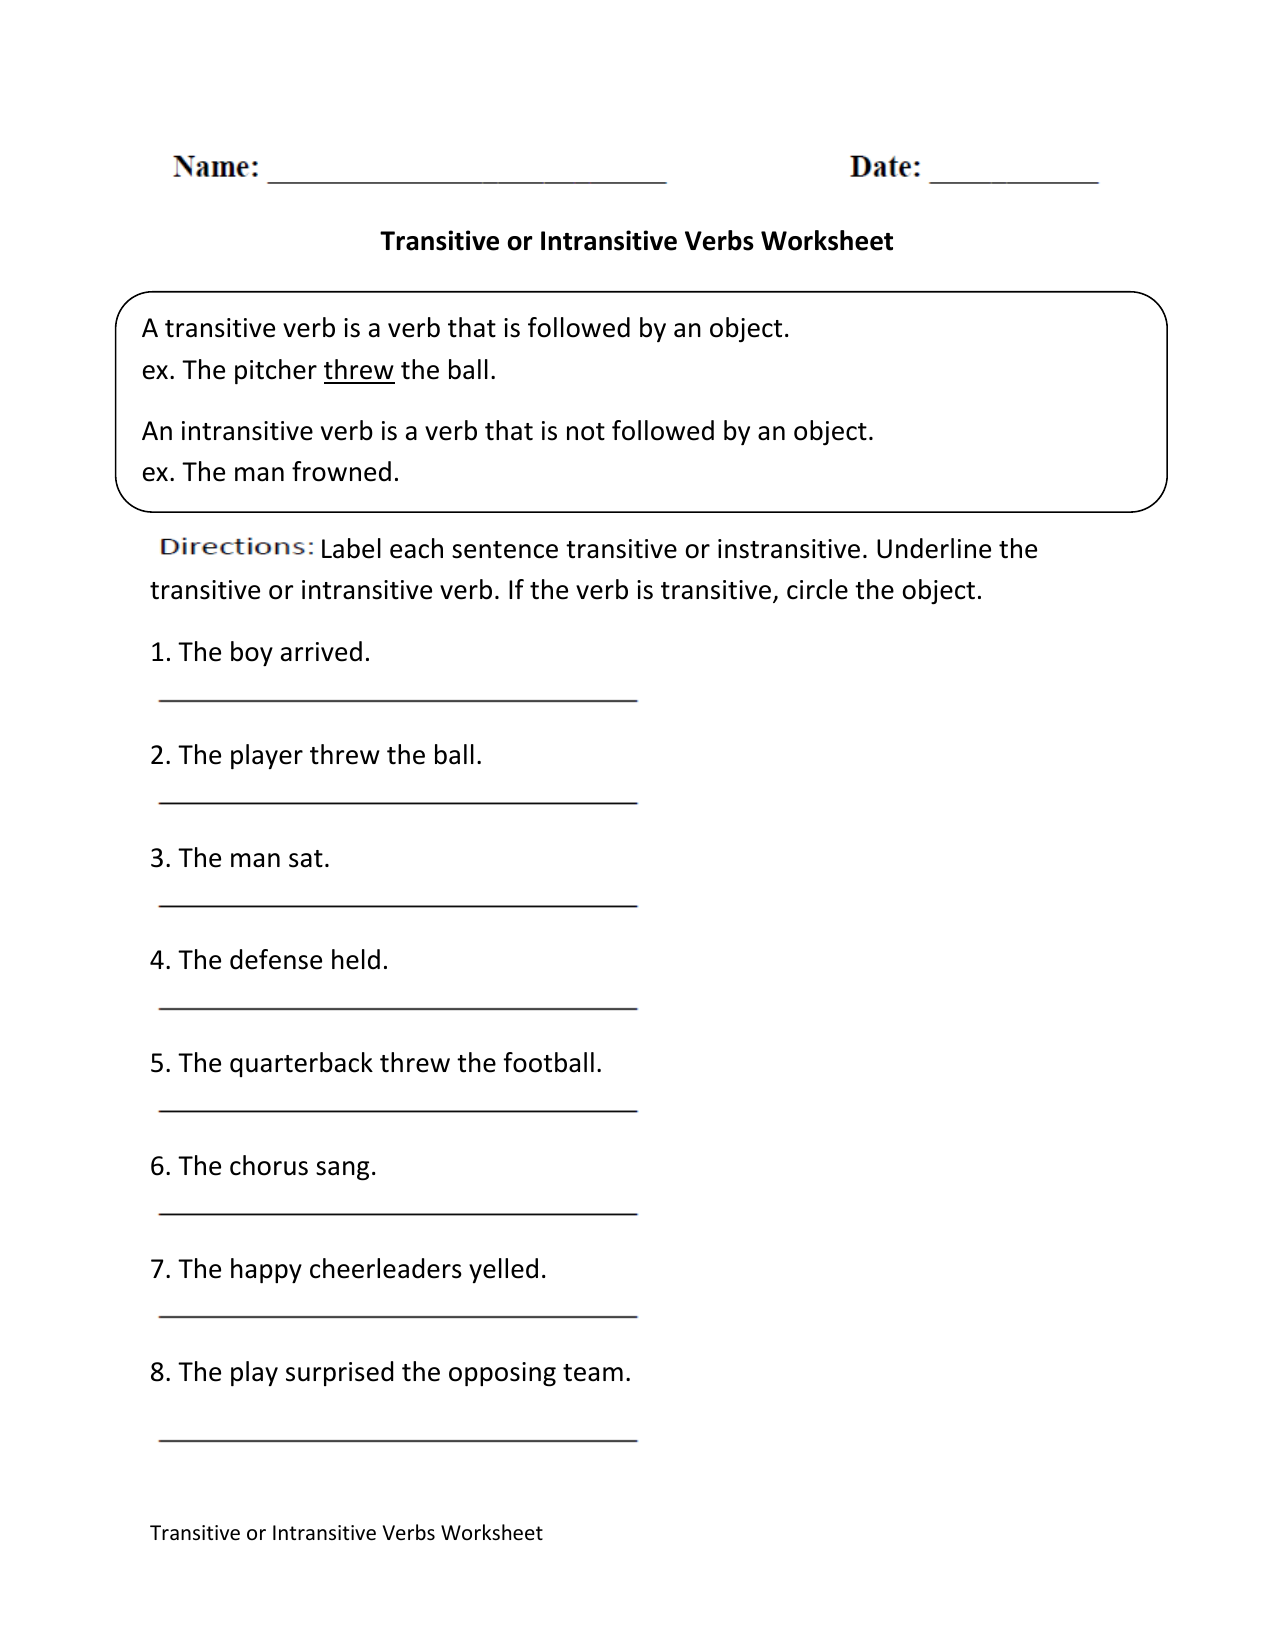 Worksheet Yellow With Transitive And Intransitive Verbs Worksheet